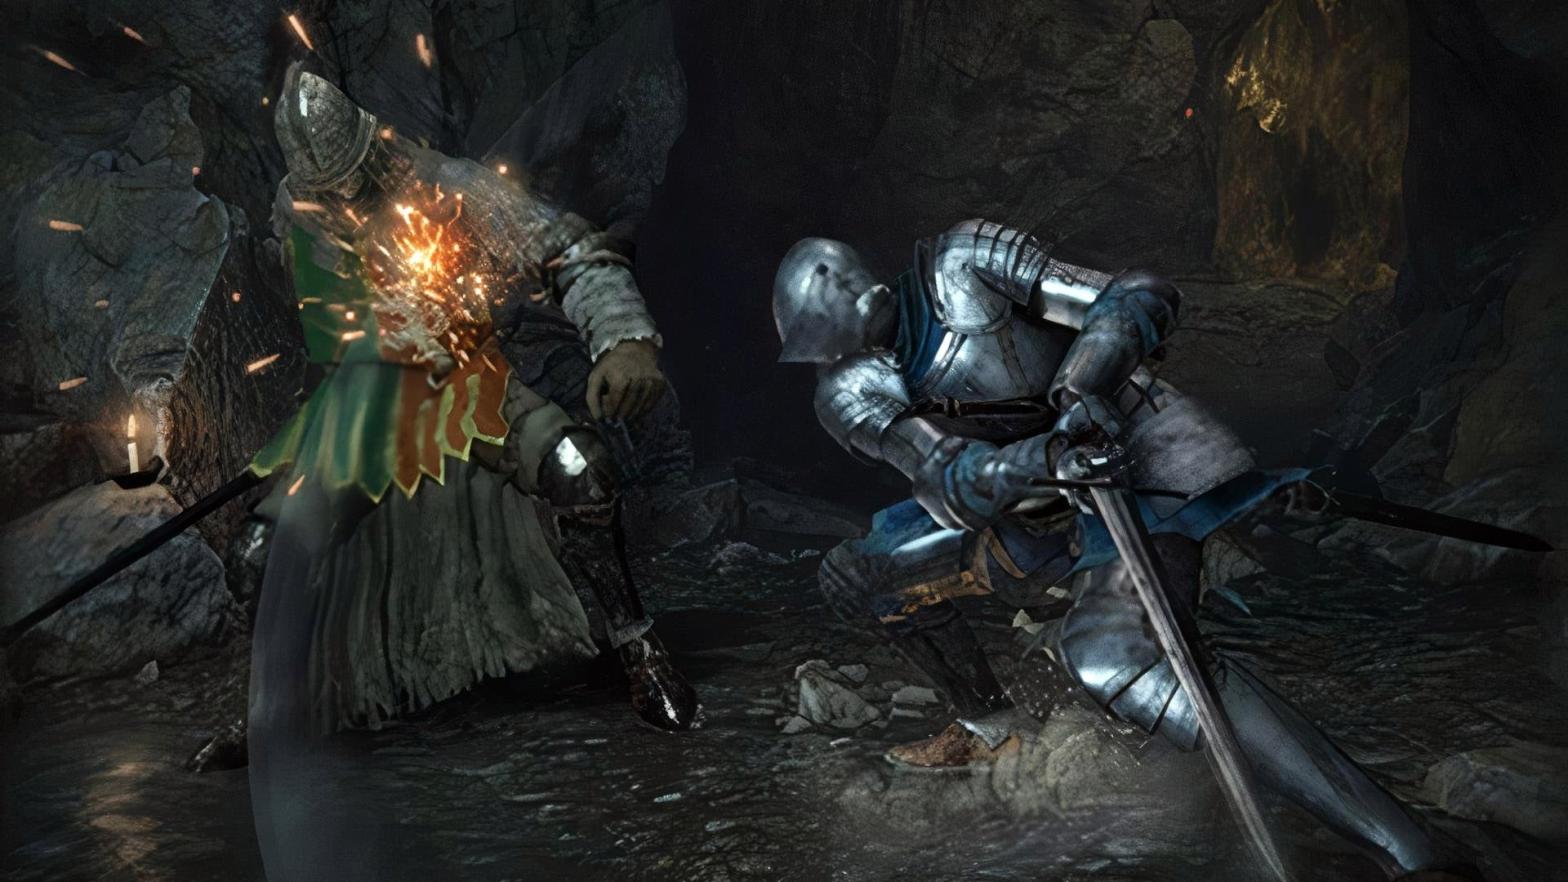 I ain't losing this time, Soldier of Godrick! (Image: FromSoftware)